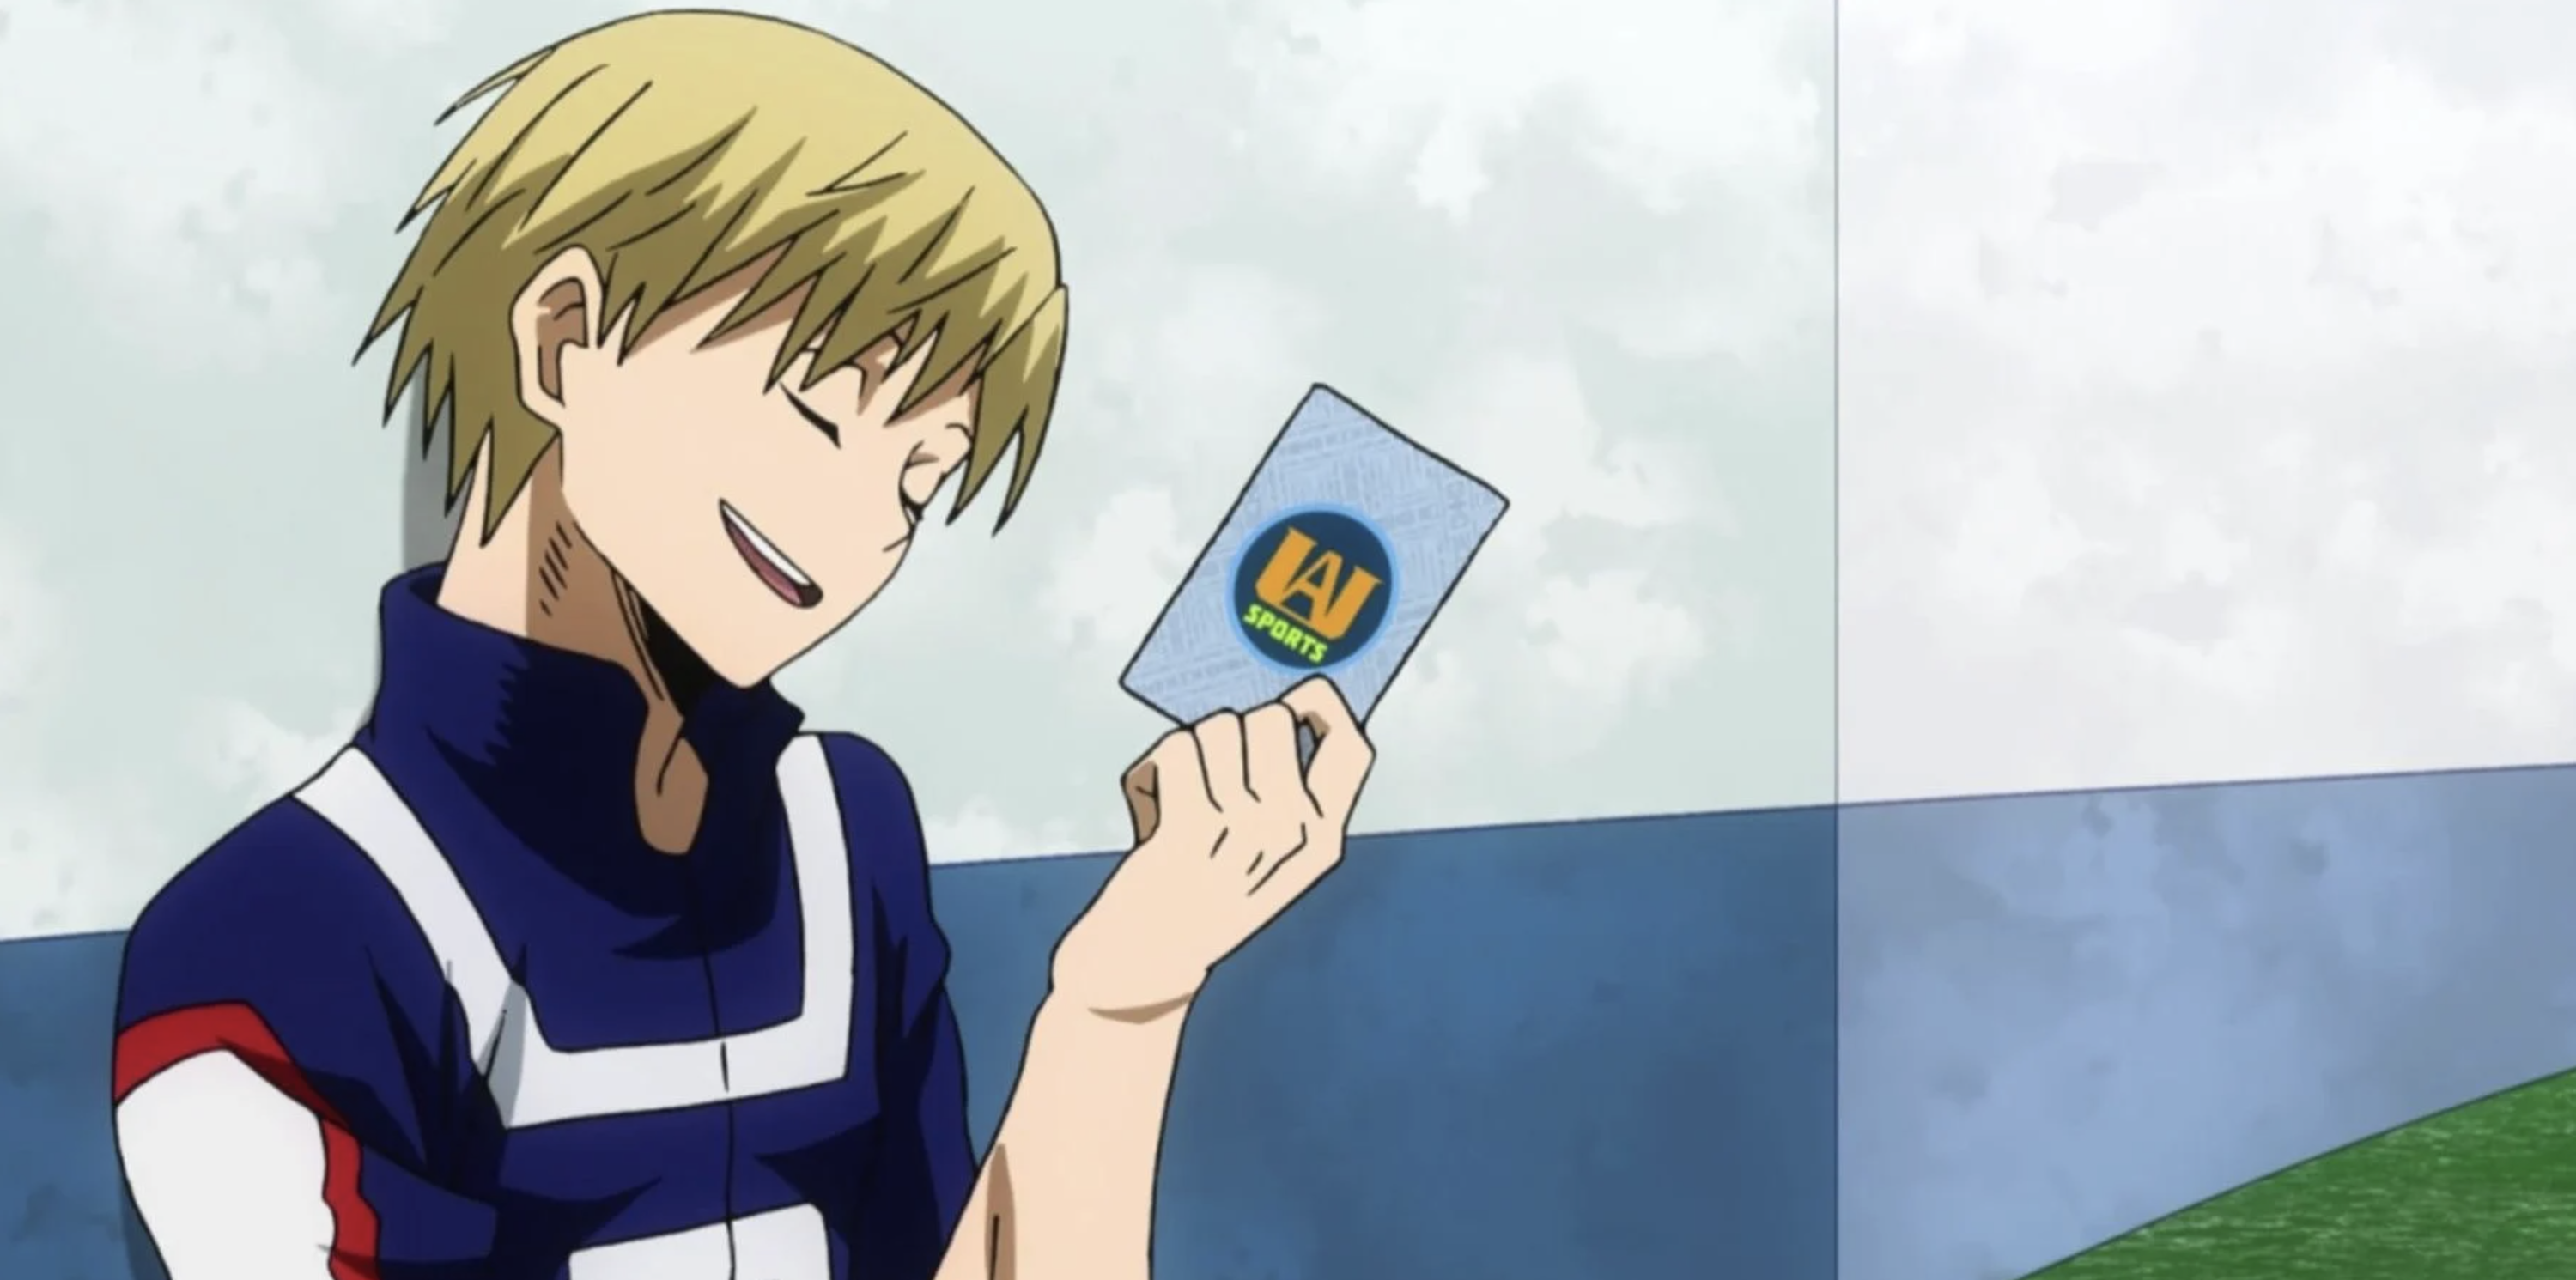 Neito Monoma from My Hero Academia leaning against a wall and holding up a card